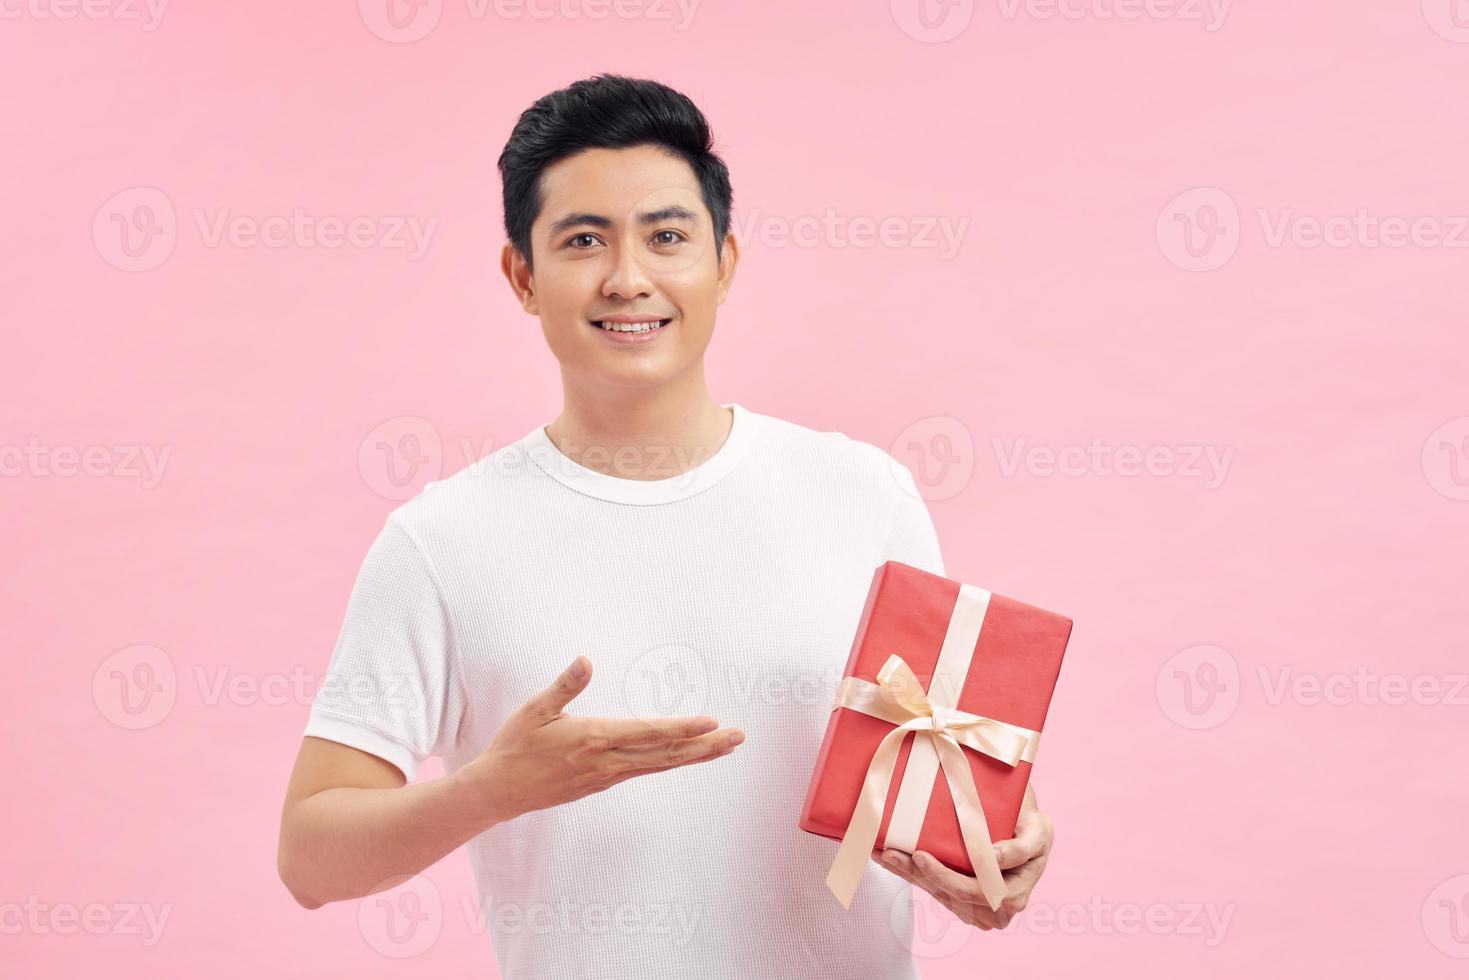 Man with white t-shirt holding gift boxes in hands photo